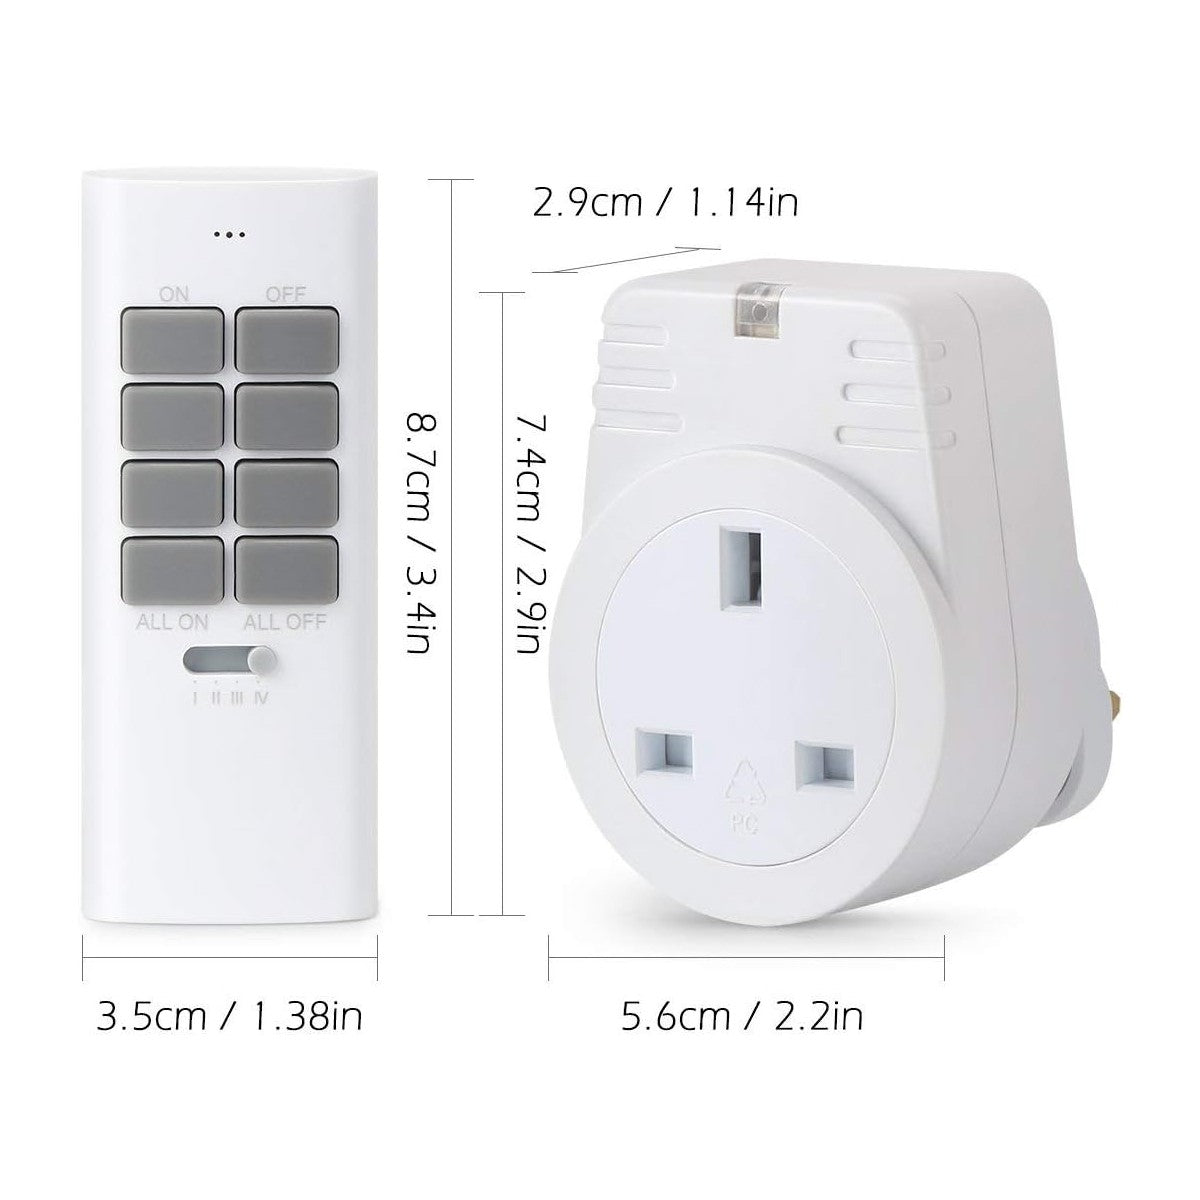 Maplin ORB RF V2 Remote Controlled Mains Plug Socket - Pack of 3 with 2 Remotes - maplin.co.uk